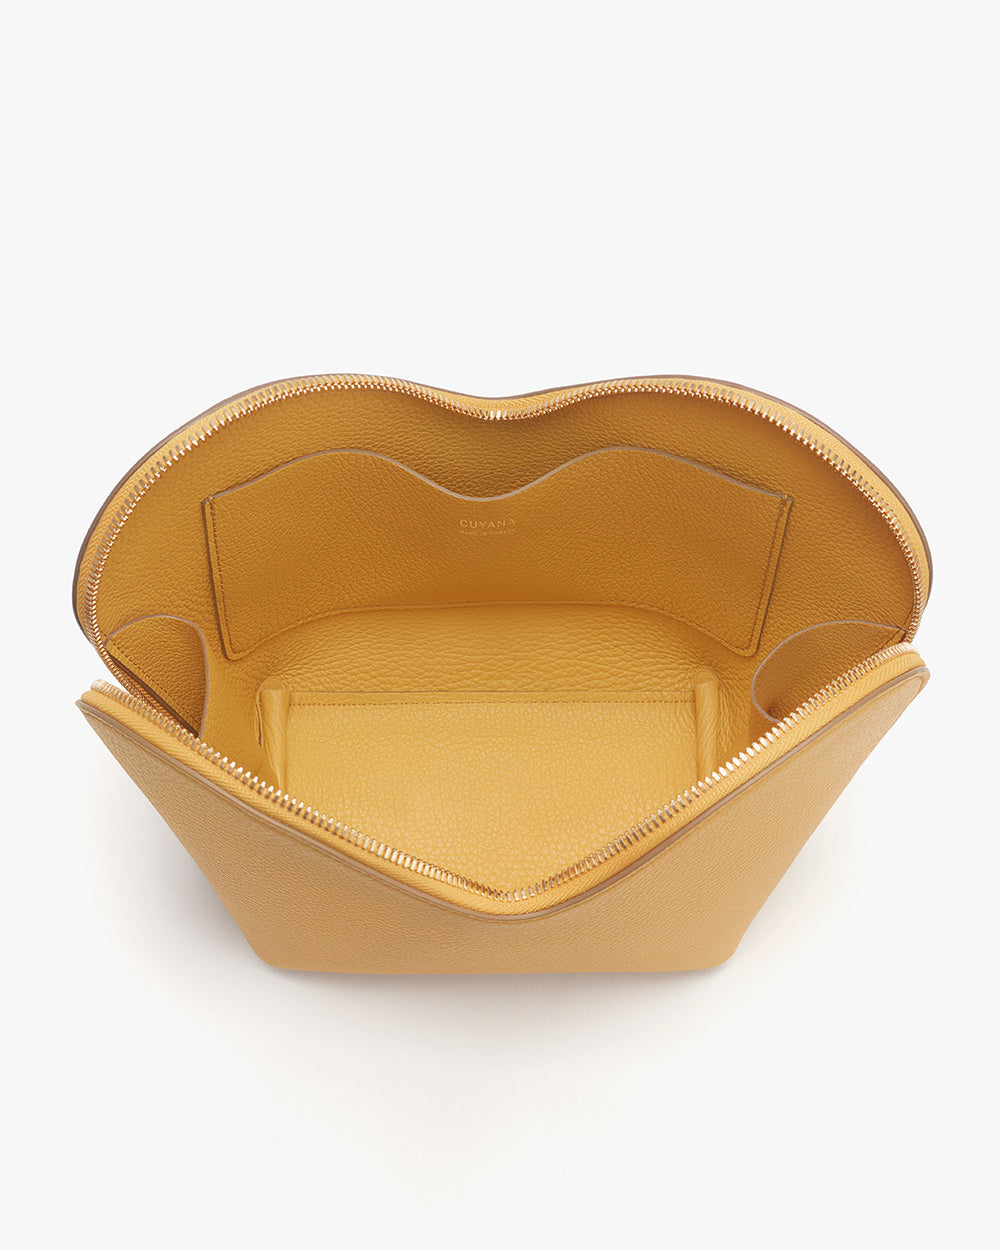 Open leather container with zipper on a plain background.